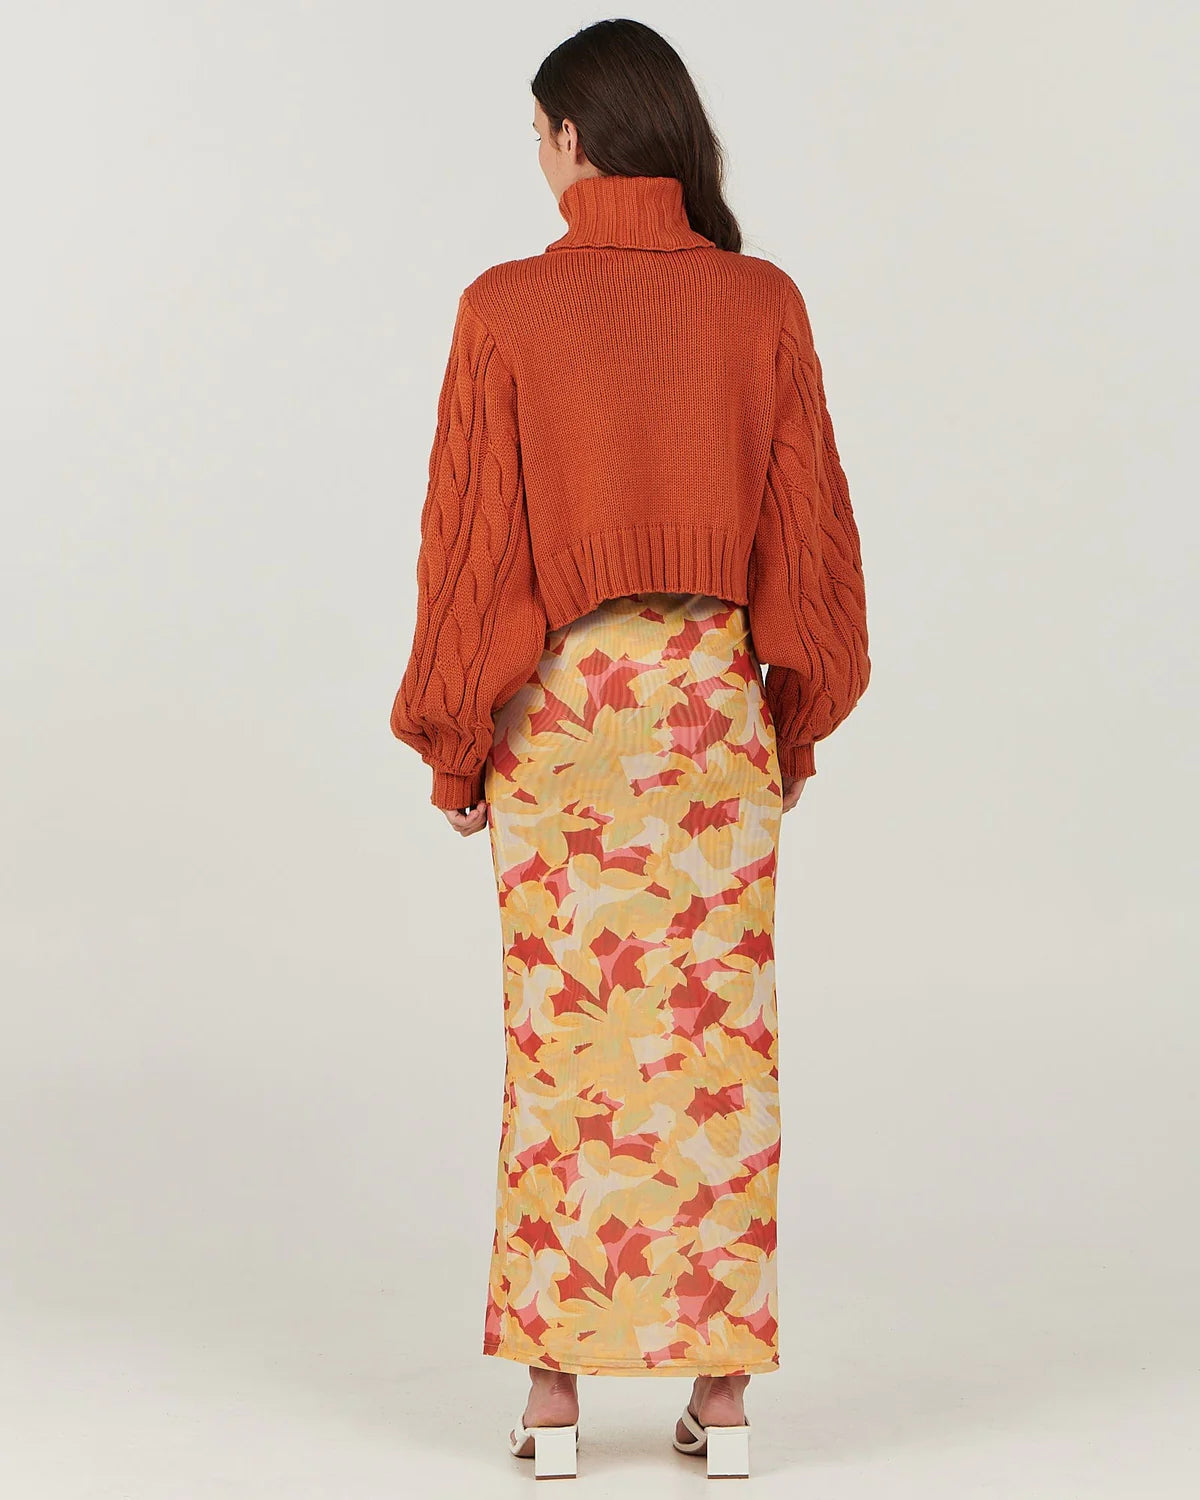 In a warm amber hue, this gorgeous cable knit sweater by Charlie Holiday features a crop body with slouchy blouson sleeves. A beautiful knit you can dress up or down, team it with a floral maxi skirt or with high-waisted jeans and ankle boots.